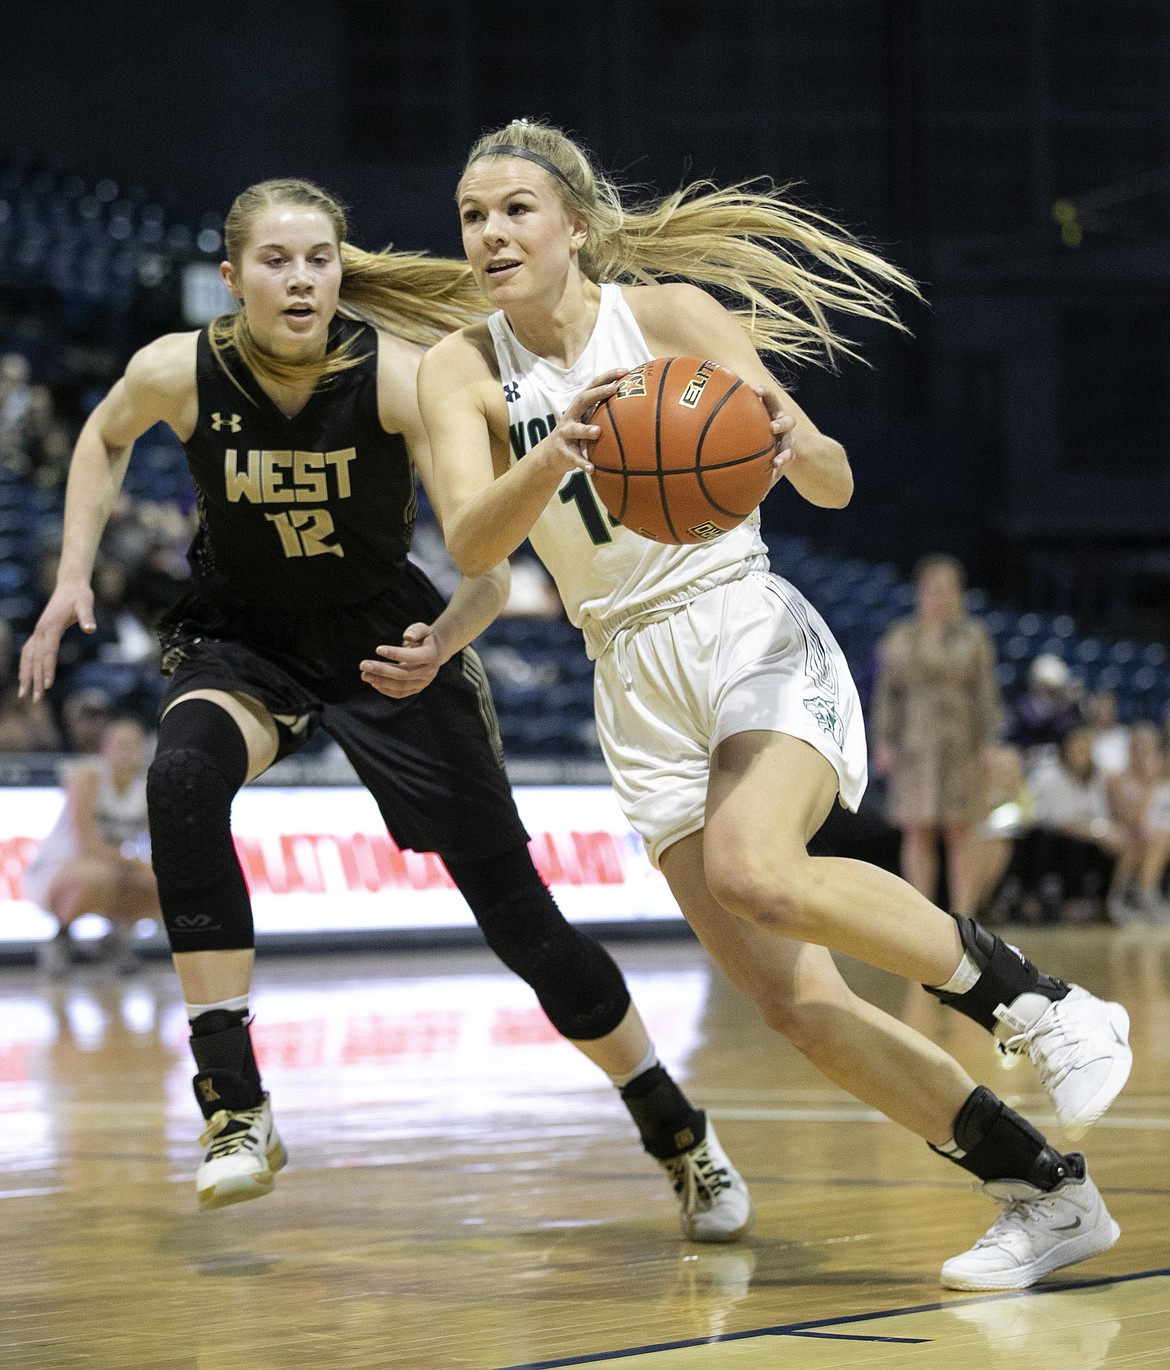 Glacier’s Aubrie Rademacher dribbles down the lane against Billings West in a quarterfinal game of the Class AA State Tournament Thursday, March 12, 2020, at Worthington Arena in Bozeman. (Ryan Berry/Bozeman Daily Chronicle)